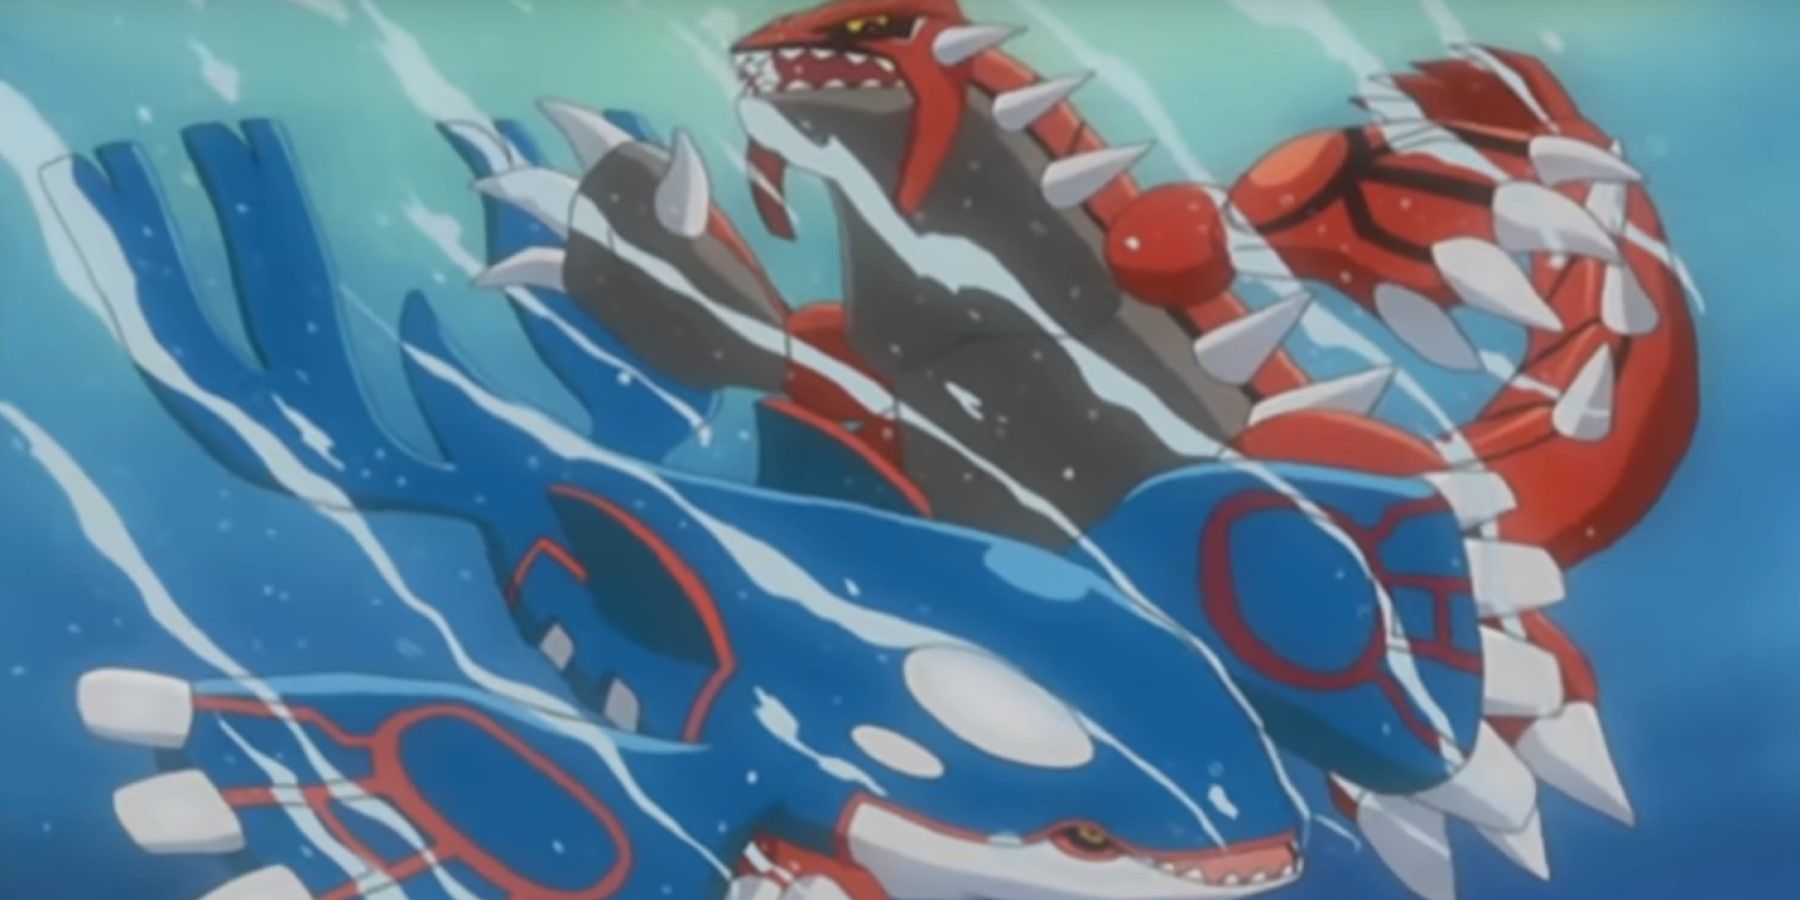 Old versus new: Youngified Groudon, Kyogre, and Rayquaza